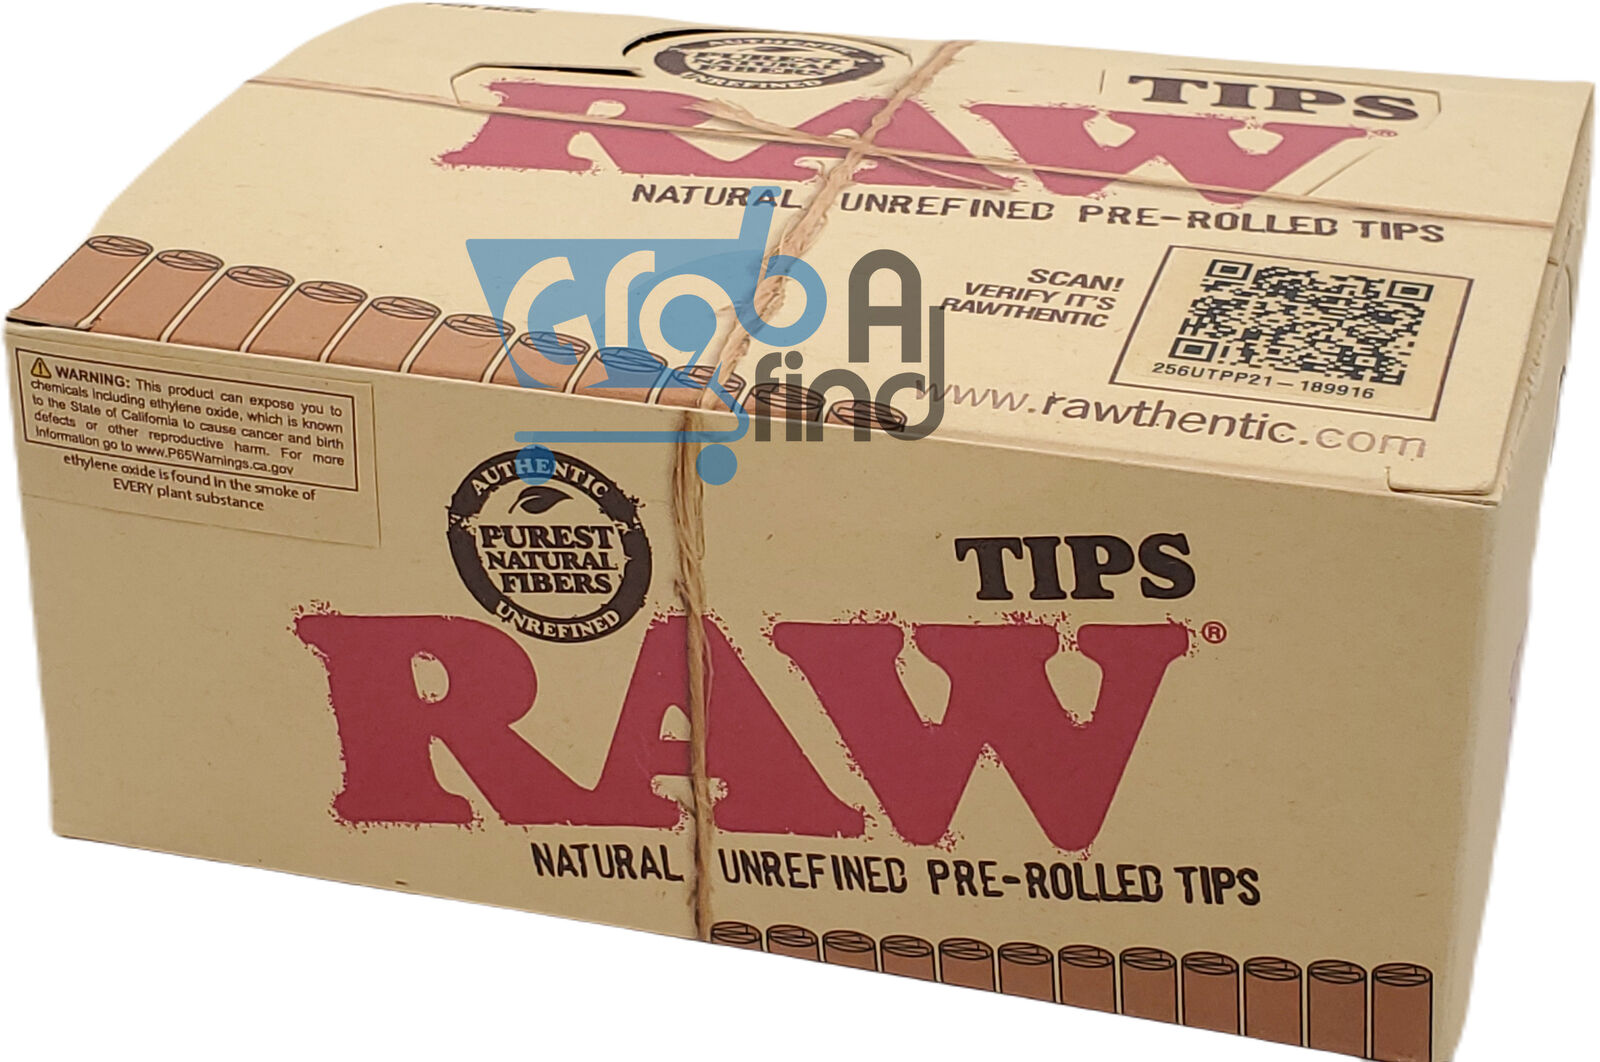 Full Box of RAW Pre-Rolled Tips (20 packs, 21 Tips Per pack, 420 Tips Total)